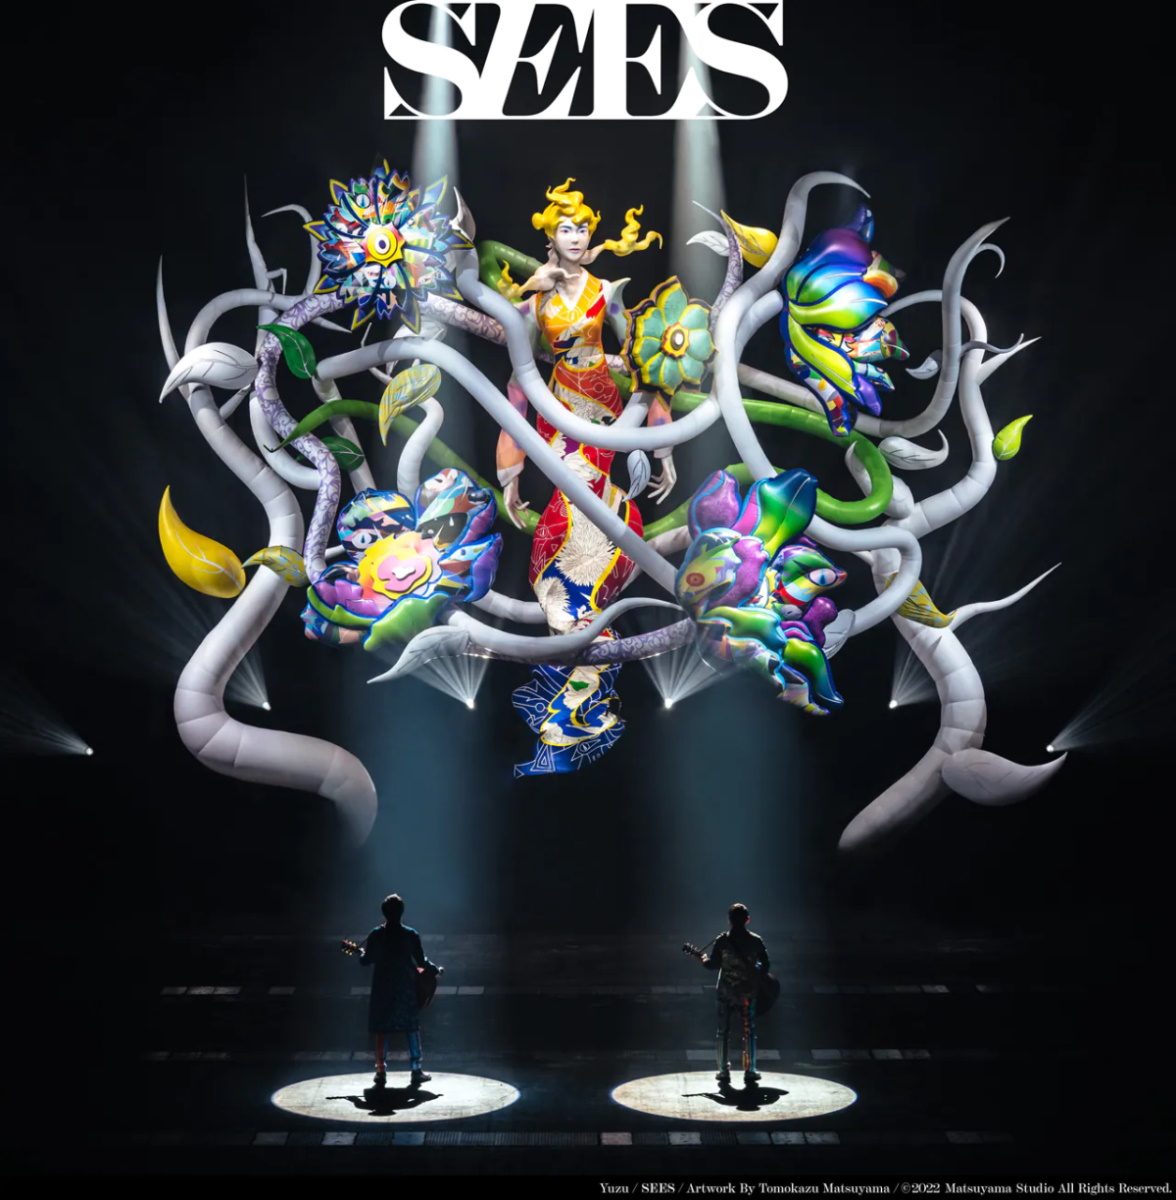 Cover for『YUZU - Isezaki』from the release『SEES』